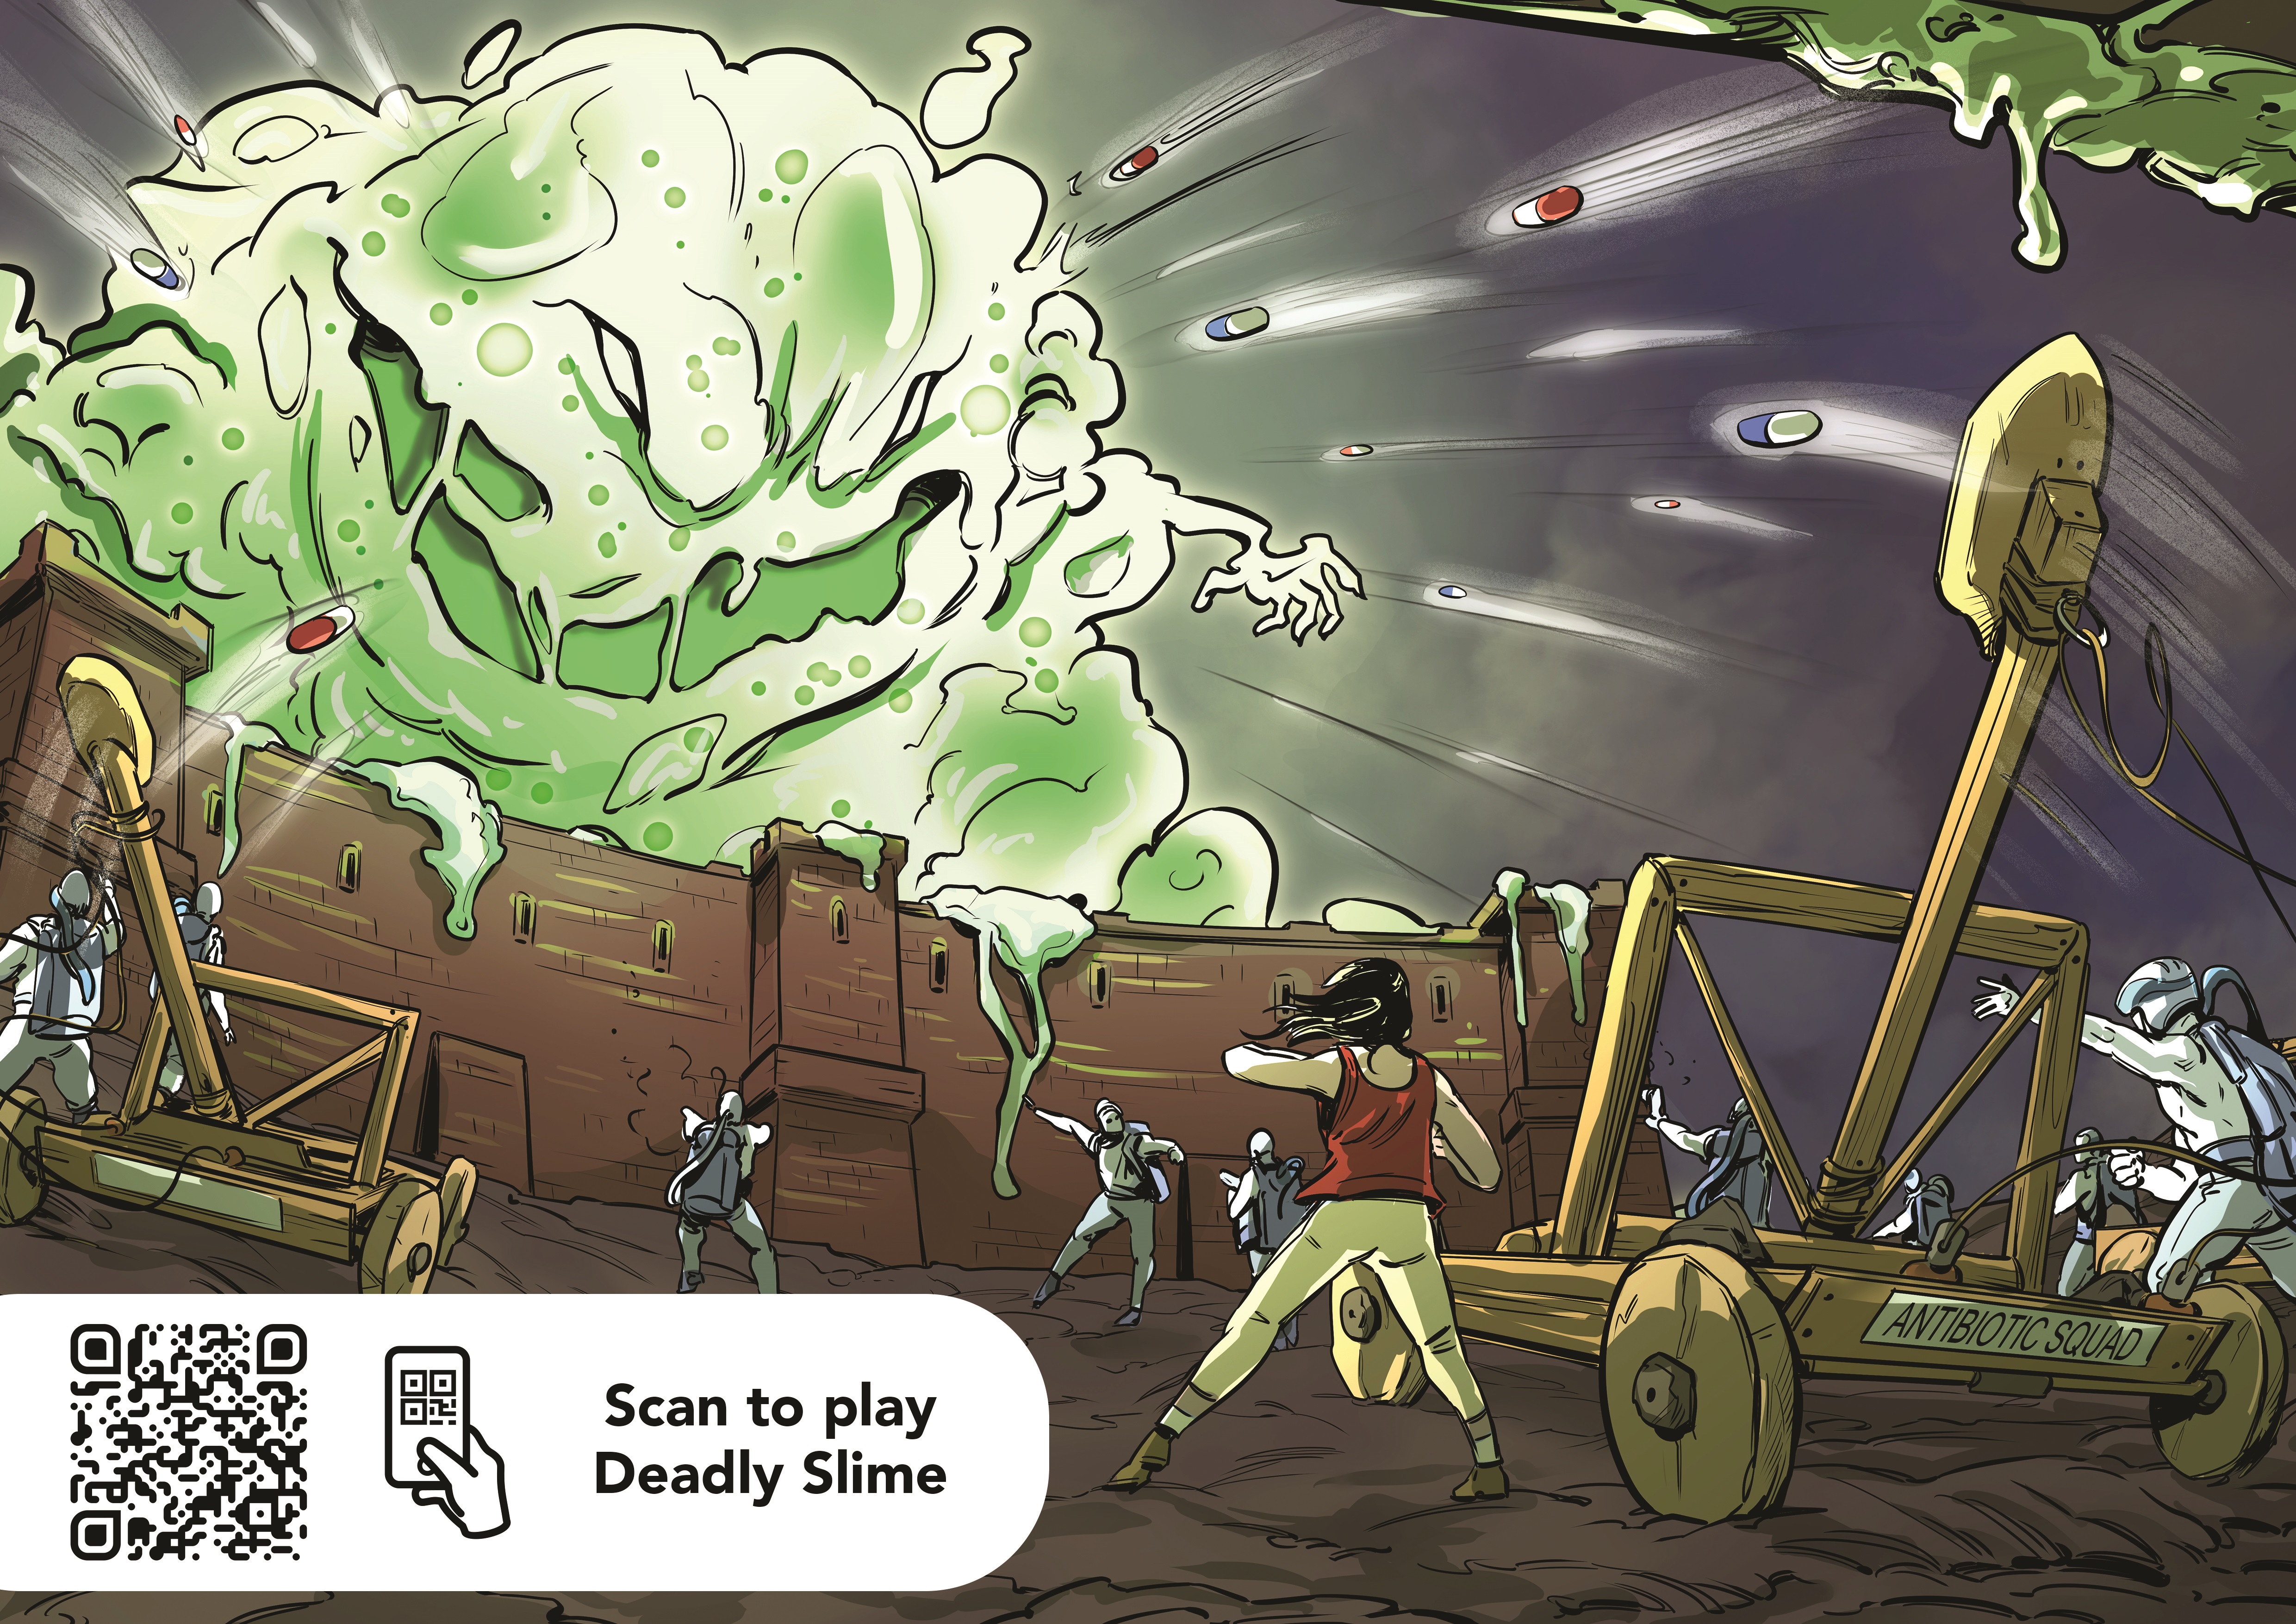 Deadly Slime- A choose-your-own-adventure animated experience